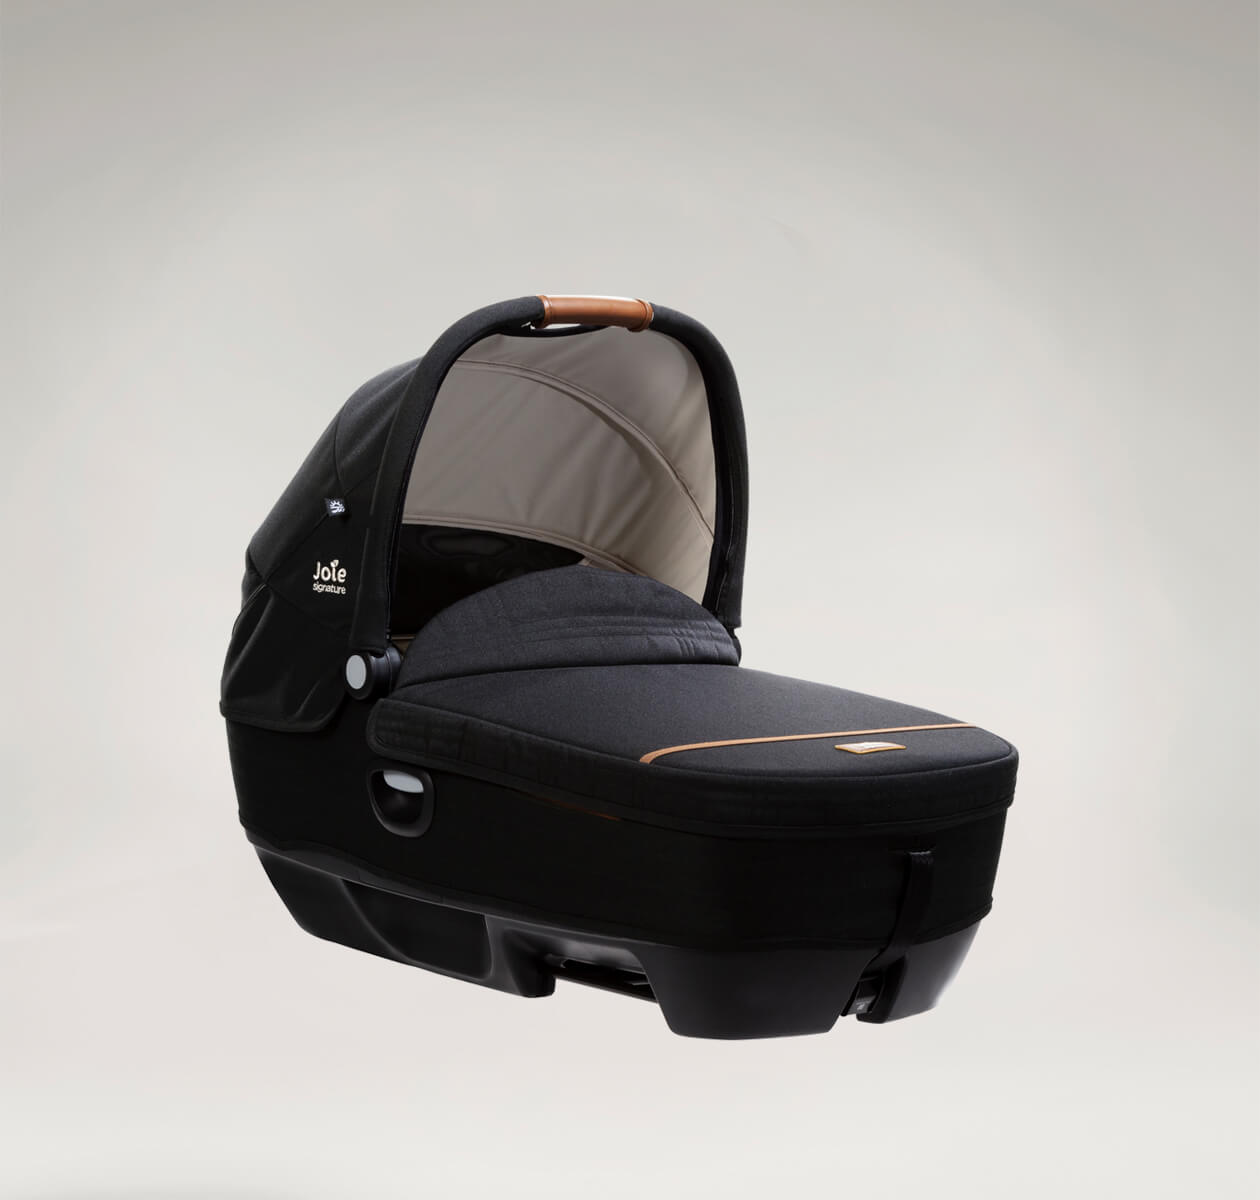  Joie Signature calmi R129 car cot in the color black eclipse with the canopy up and protective cover on facing a right angle